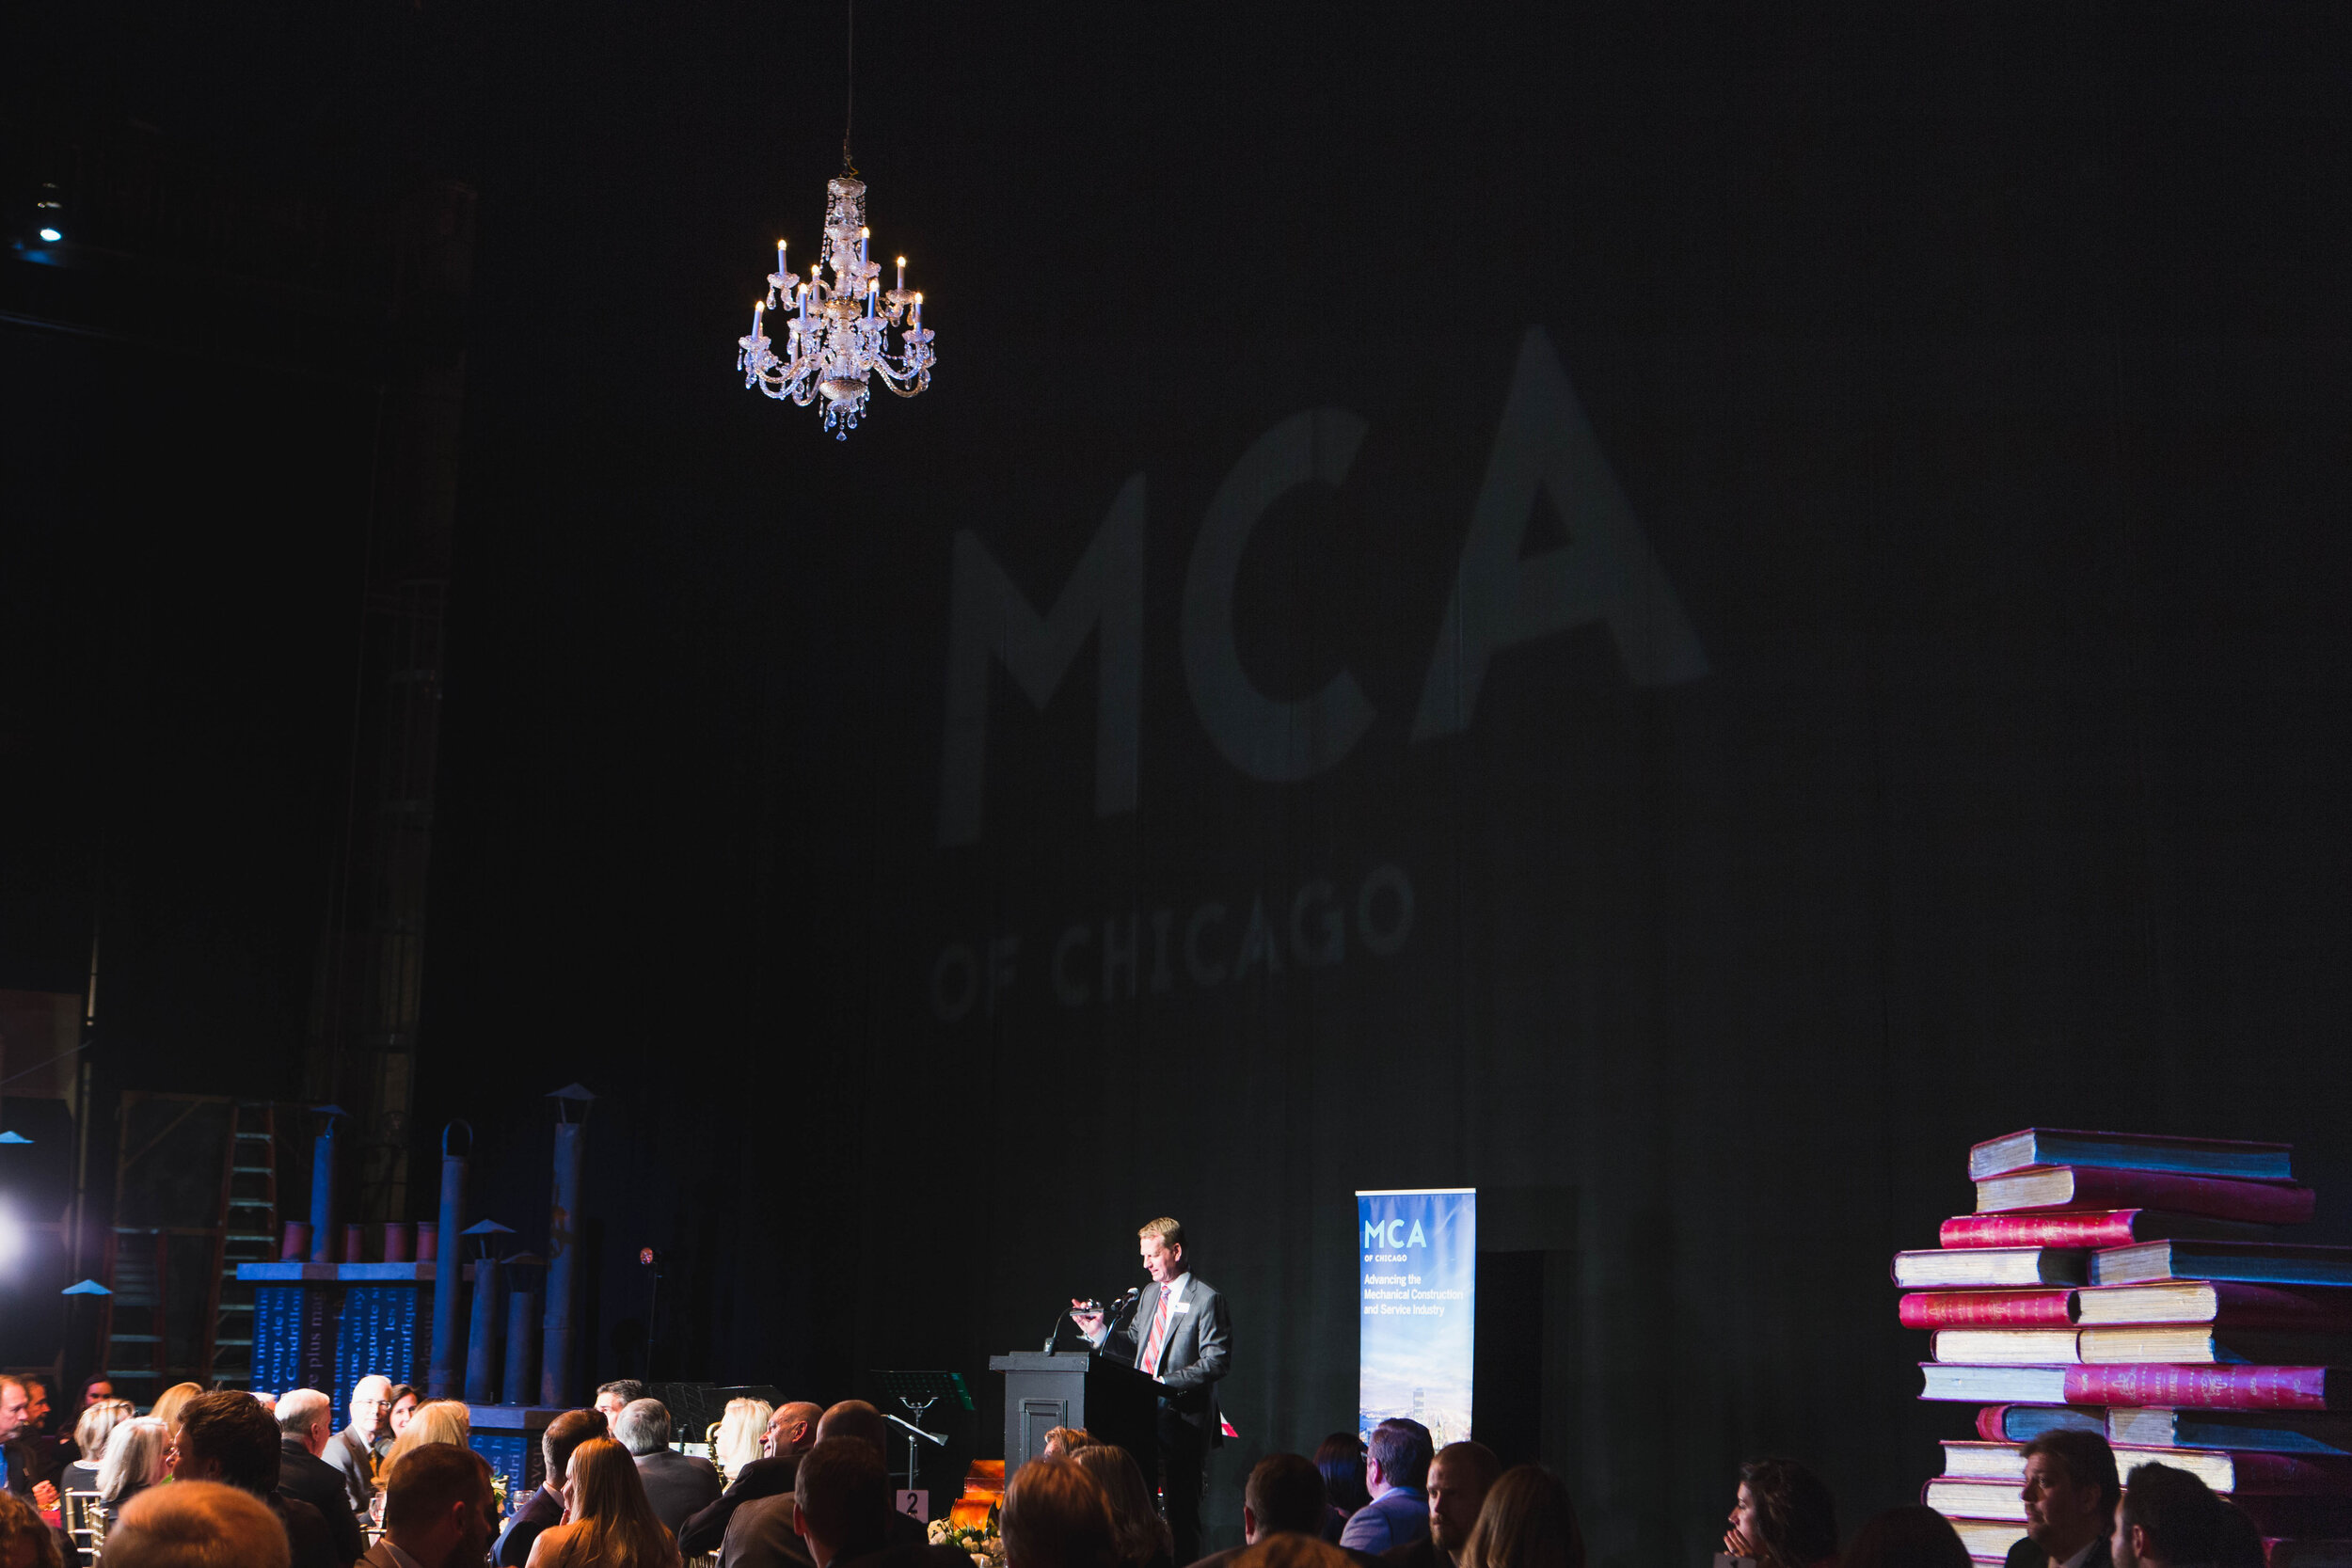 MCA_Holiday_Party_Event-051.jpg